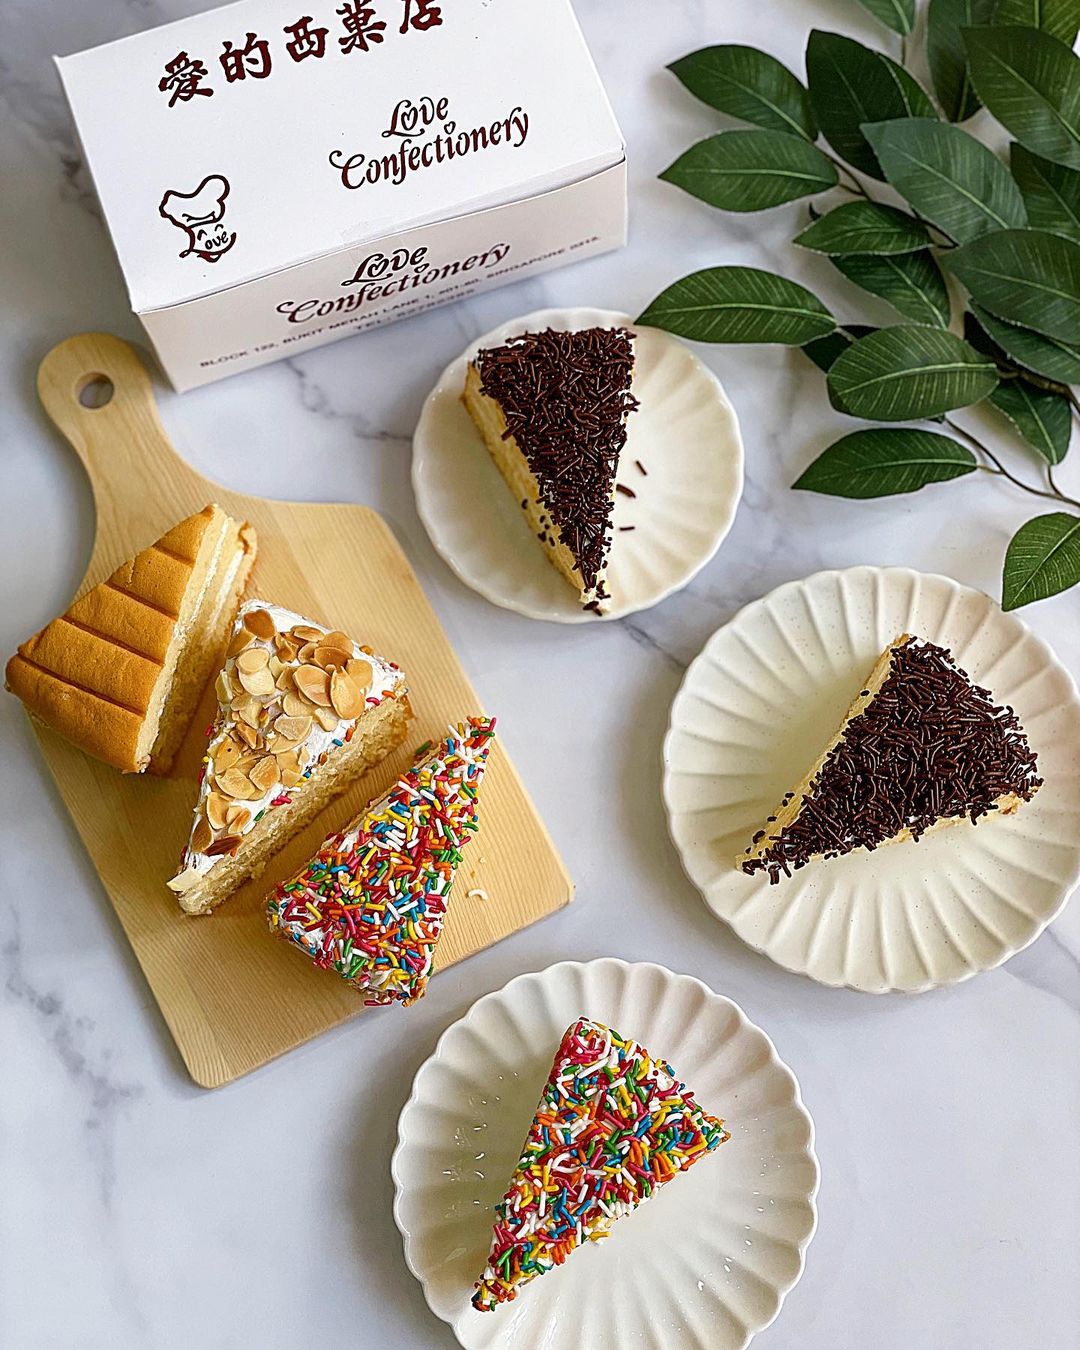 love confectionery - flatlay buttercream cakes